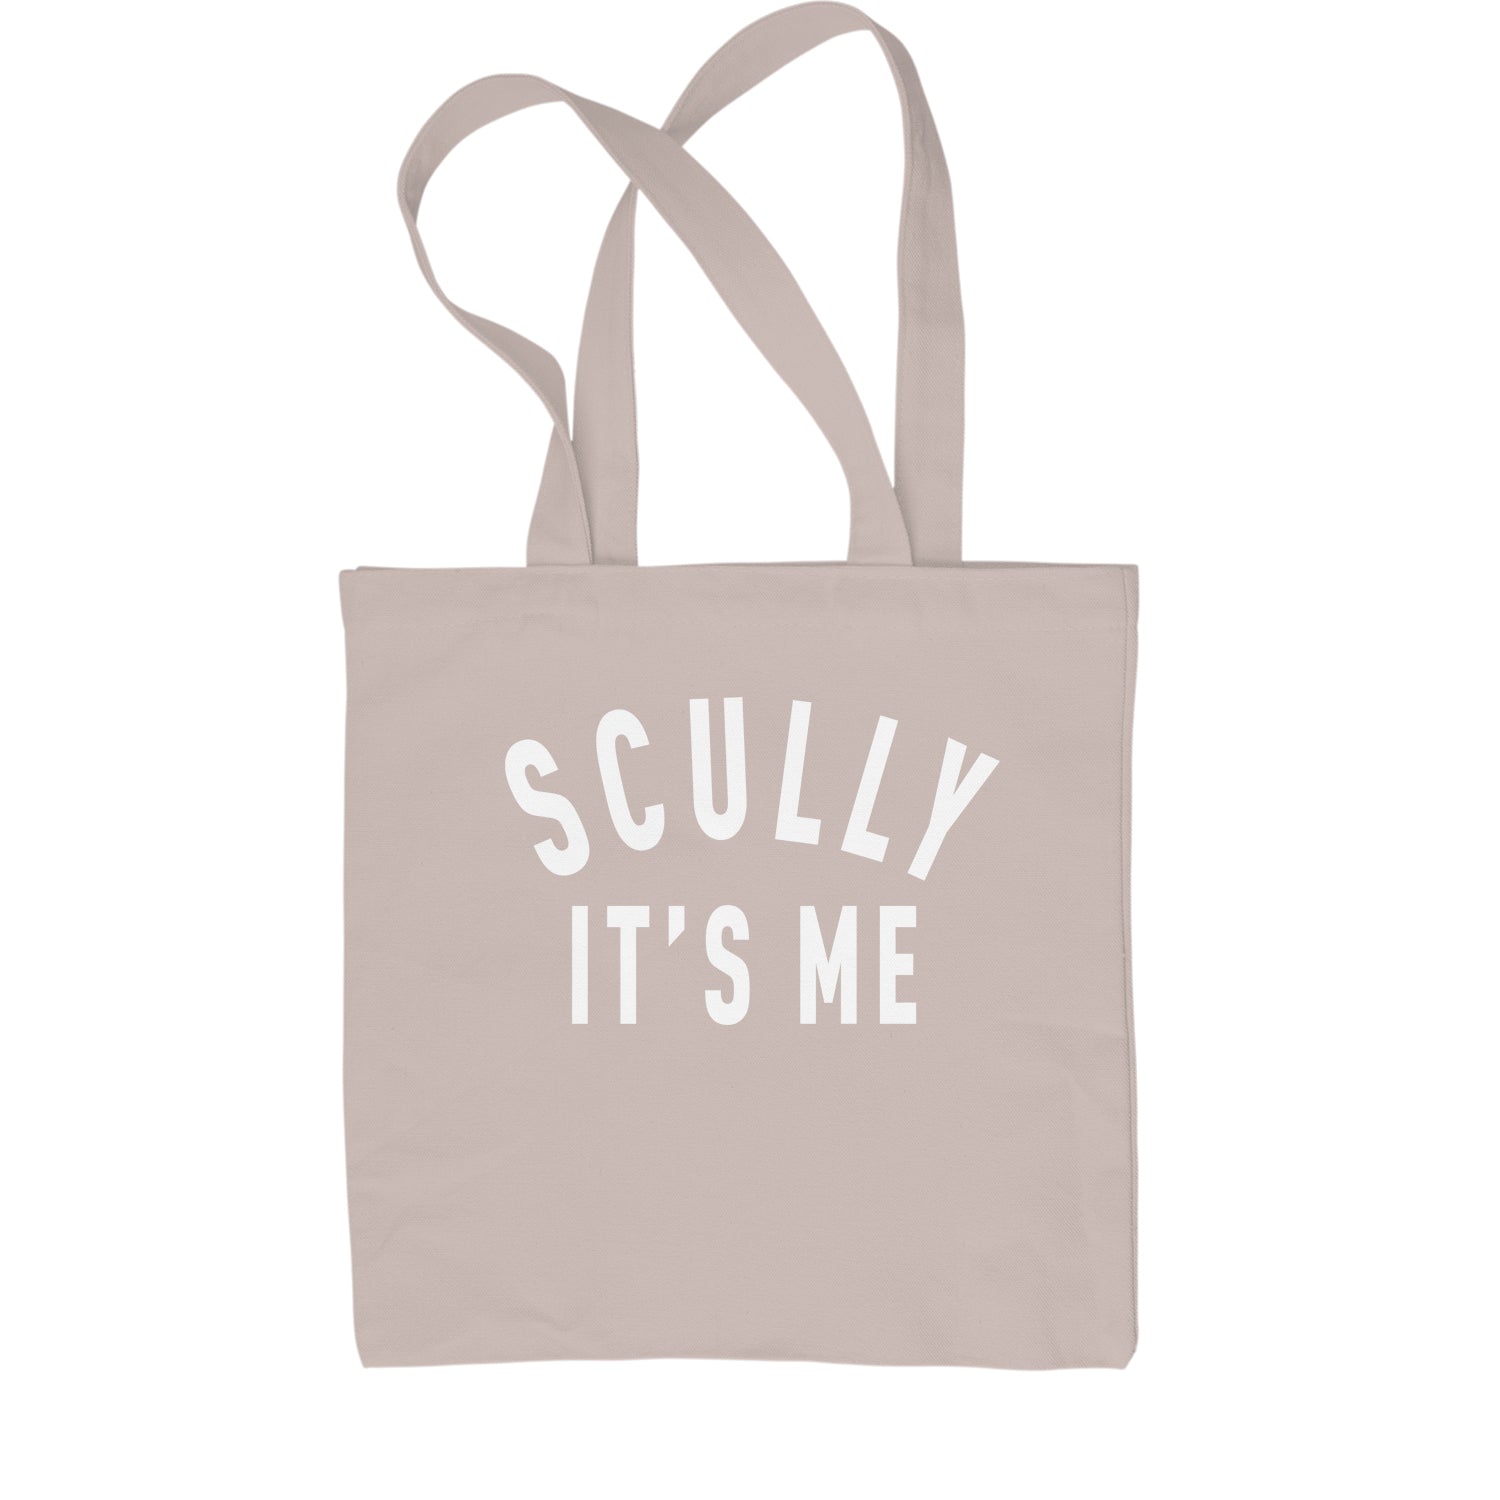 Scully, It's Me Shopping Tote Bag #expressiontees by Expression Tees